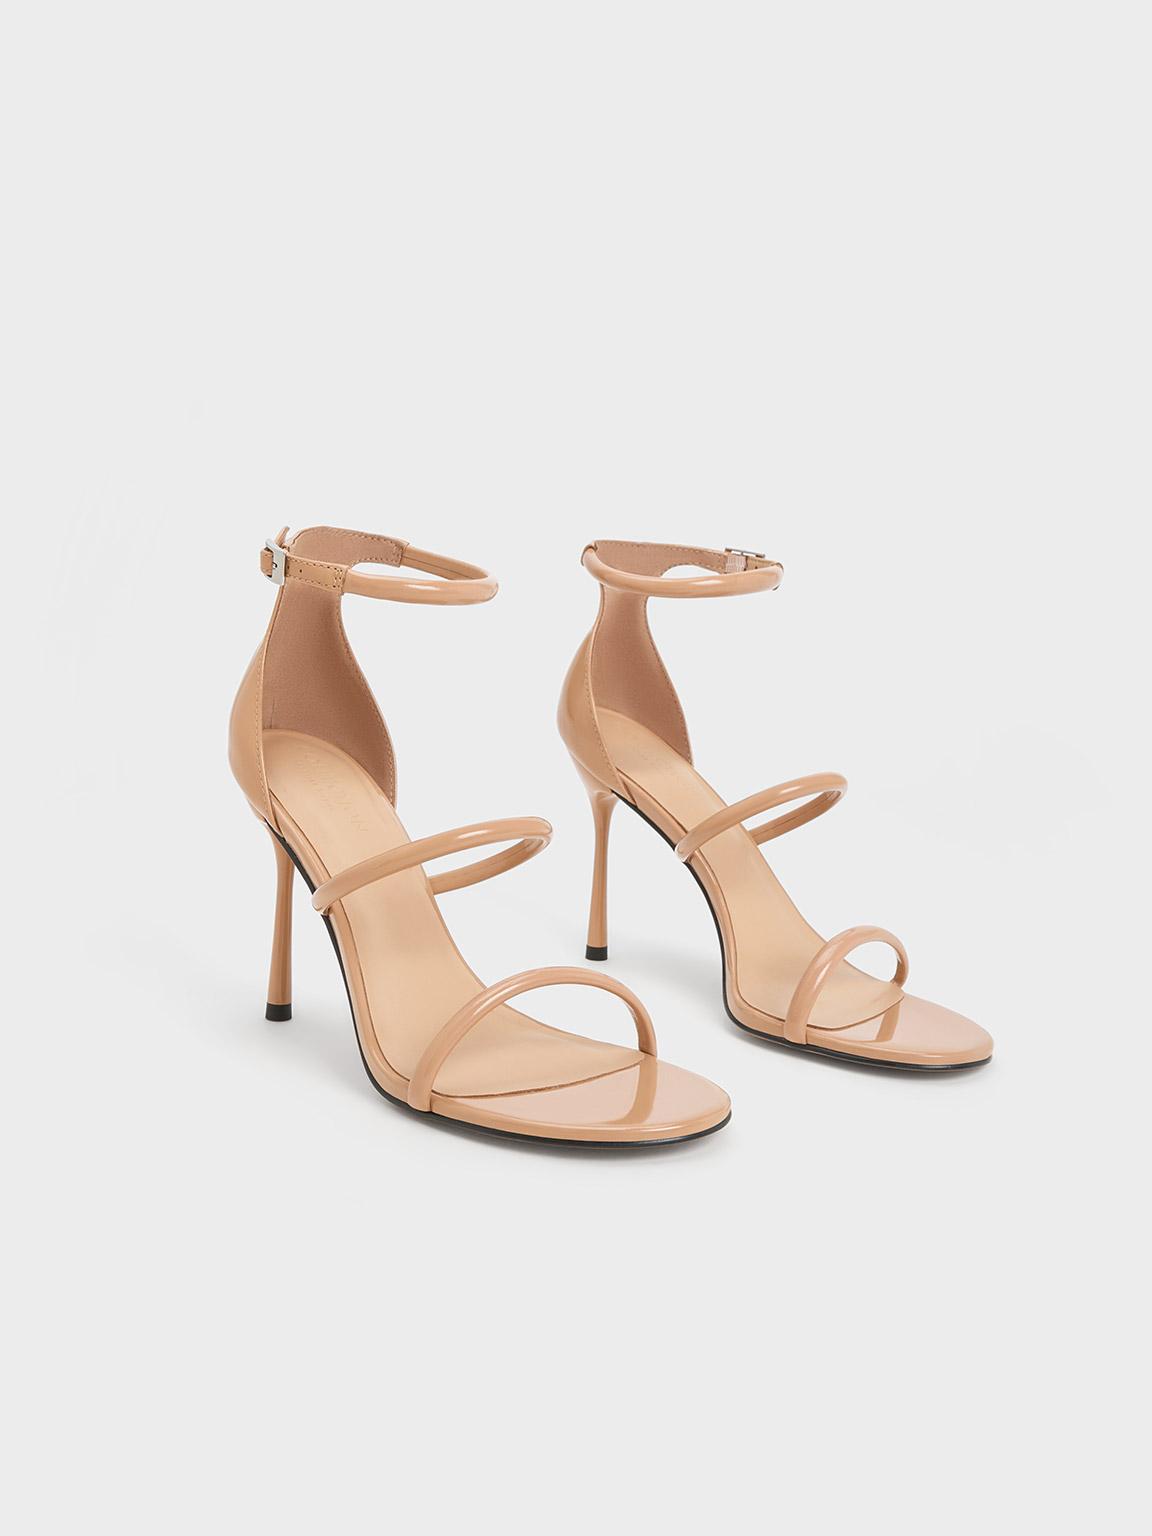 Charles & Keith Women's Patent Ankle-Strap Sandals